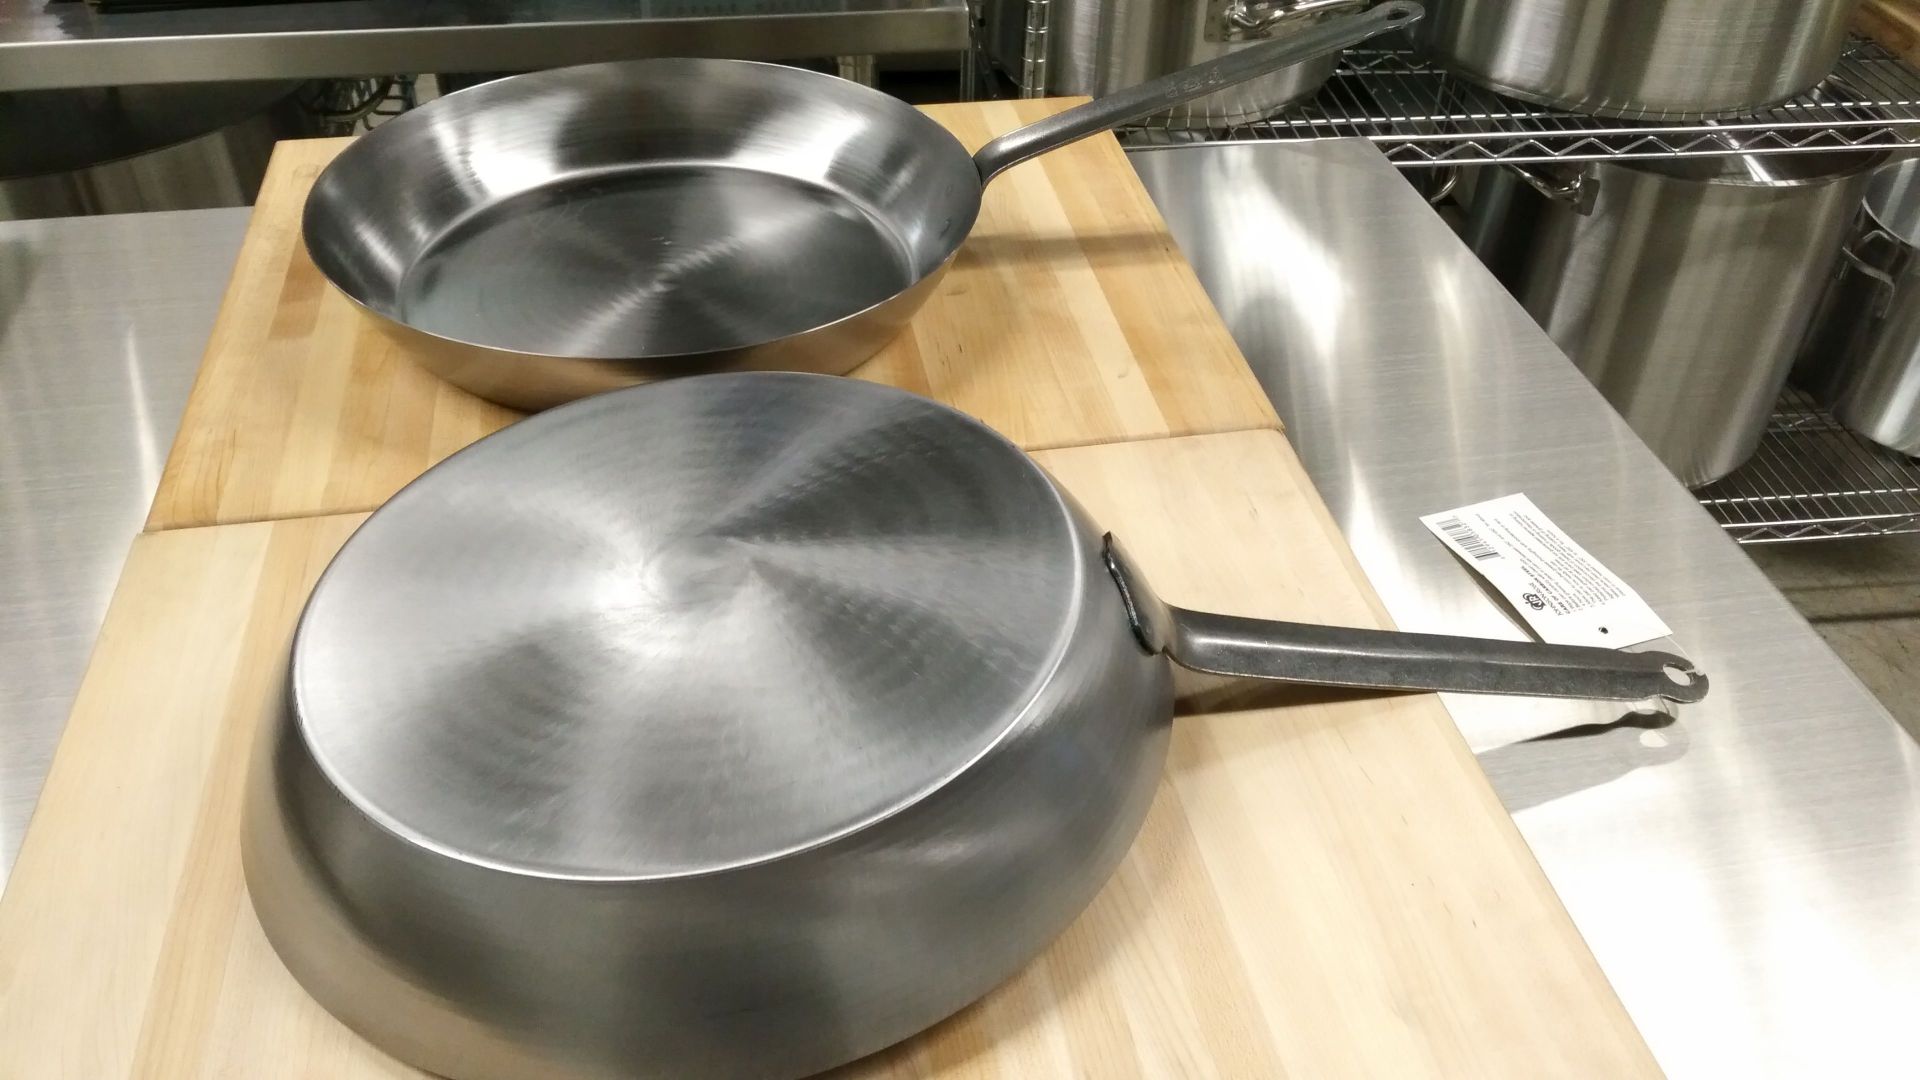 12.5" Carbon Steel Fry Pans Induction Capable - Lot of 2 - Image 3 of 4